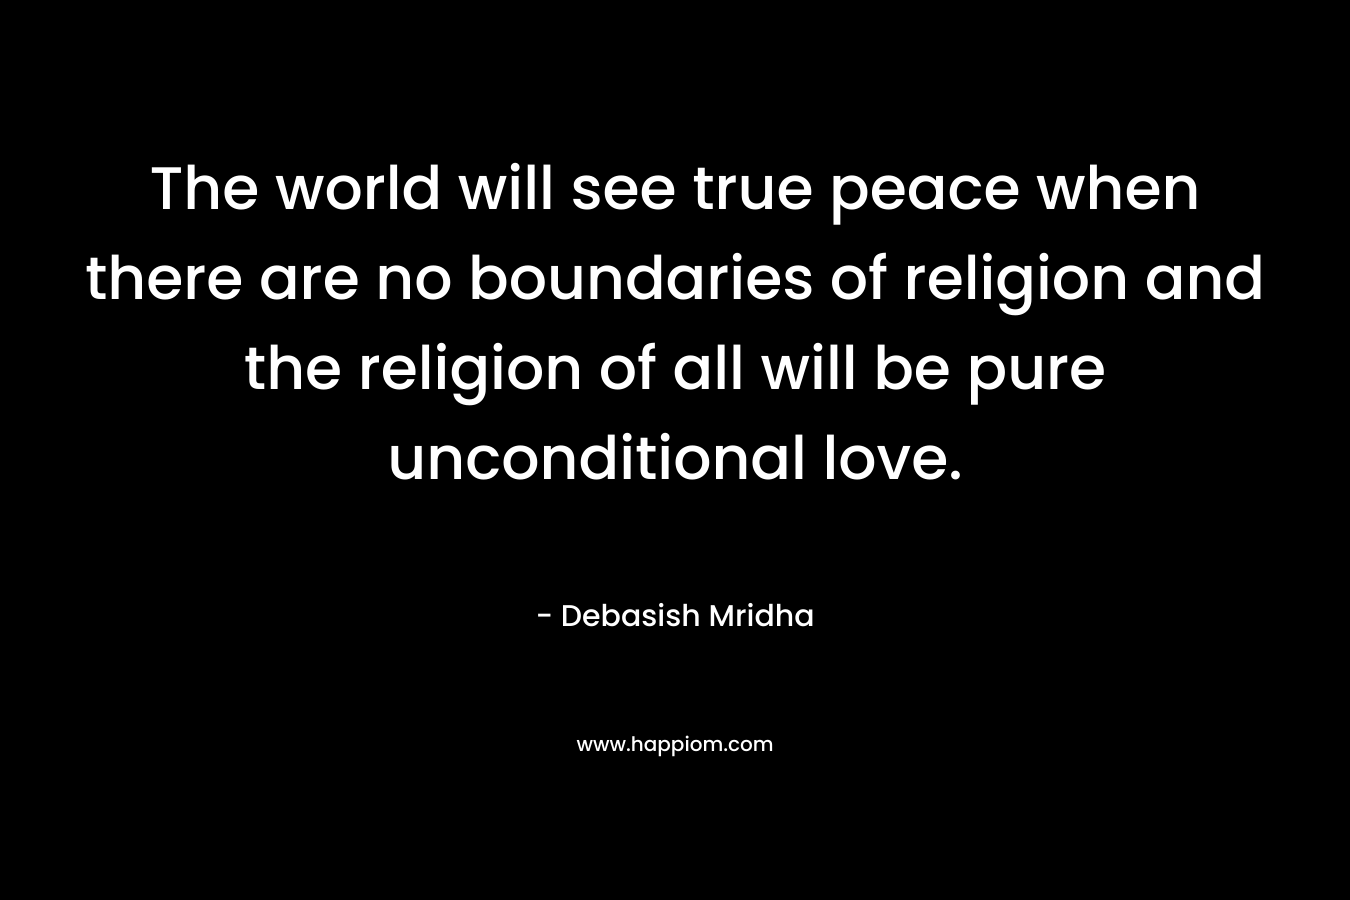 The world will see true peace when there are no boundaries of religion and the religion of all will be pure unconditional love.